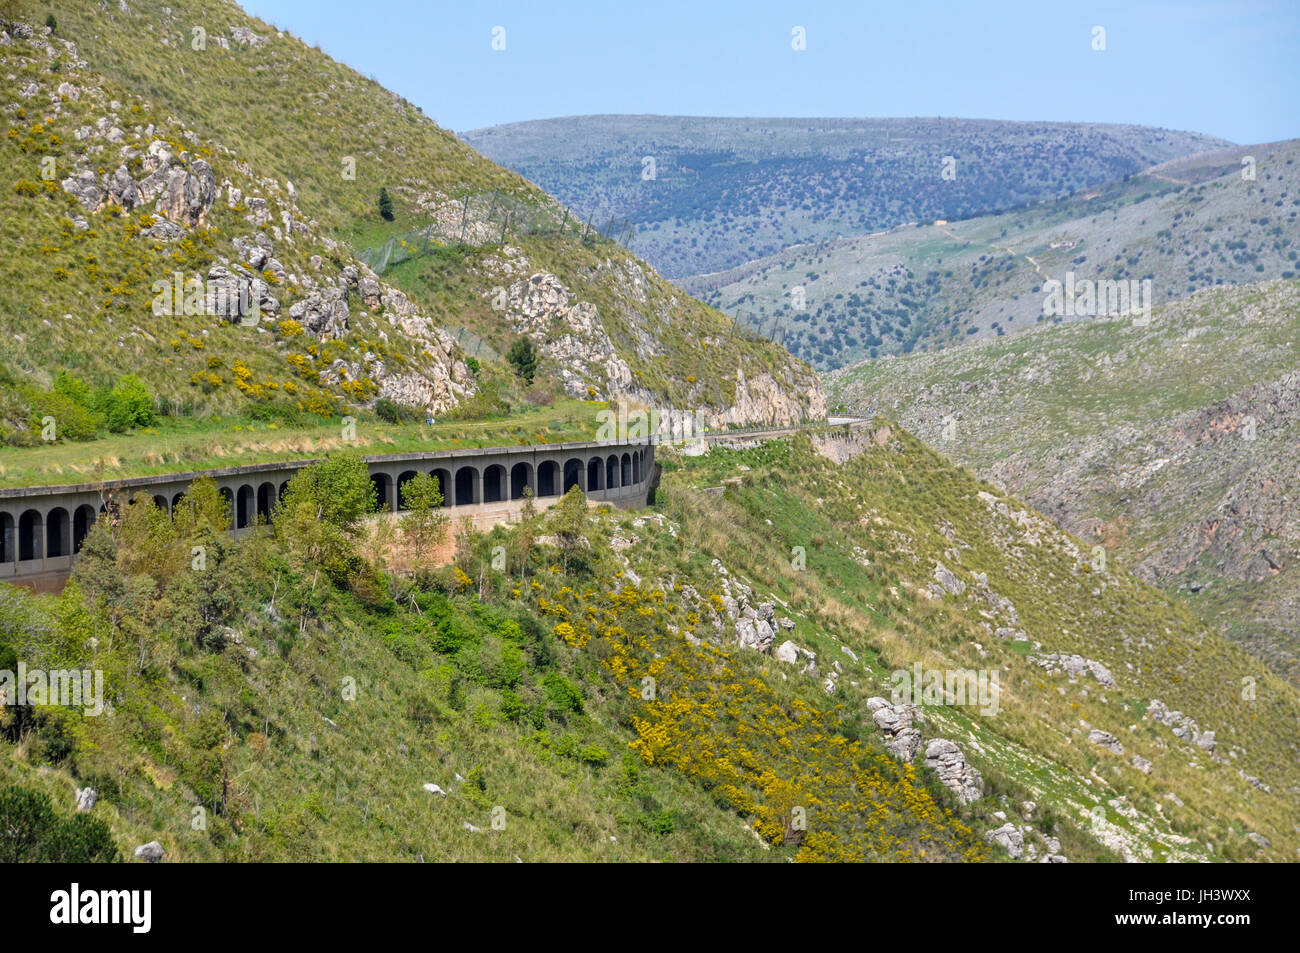 The SS 186 passing through a tunnel in the mountains of Sicily, Italy. Stock Photo